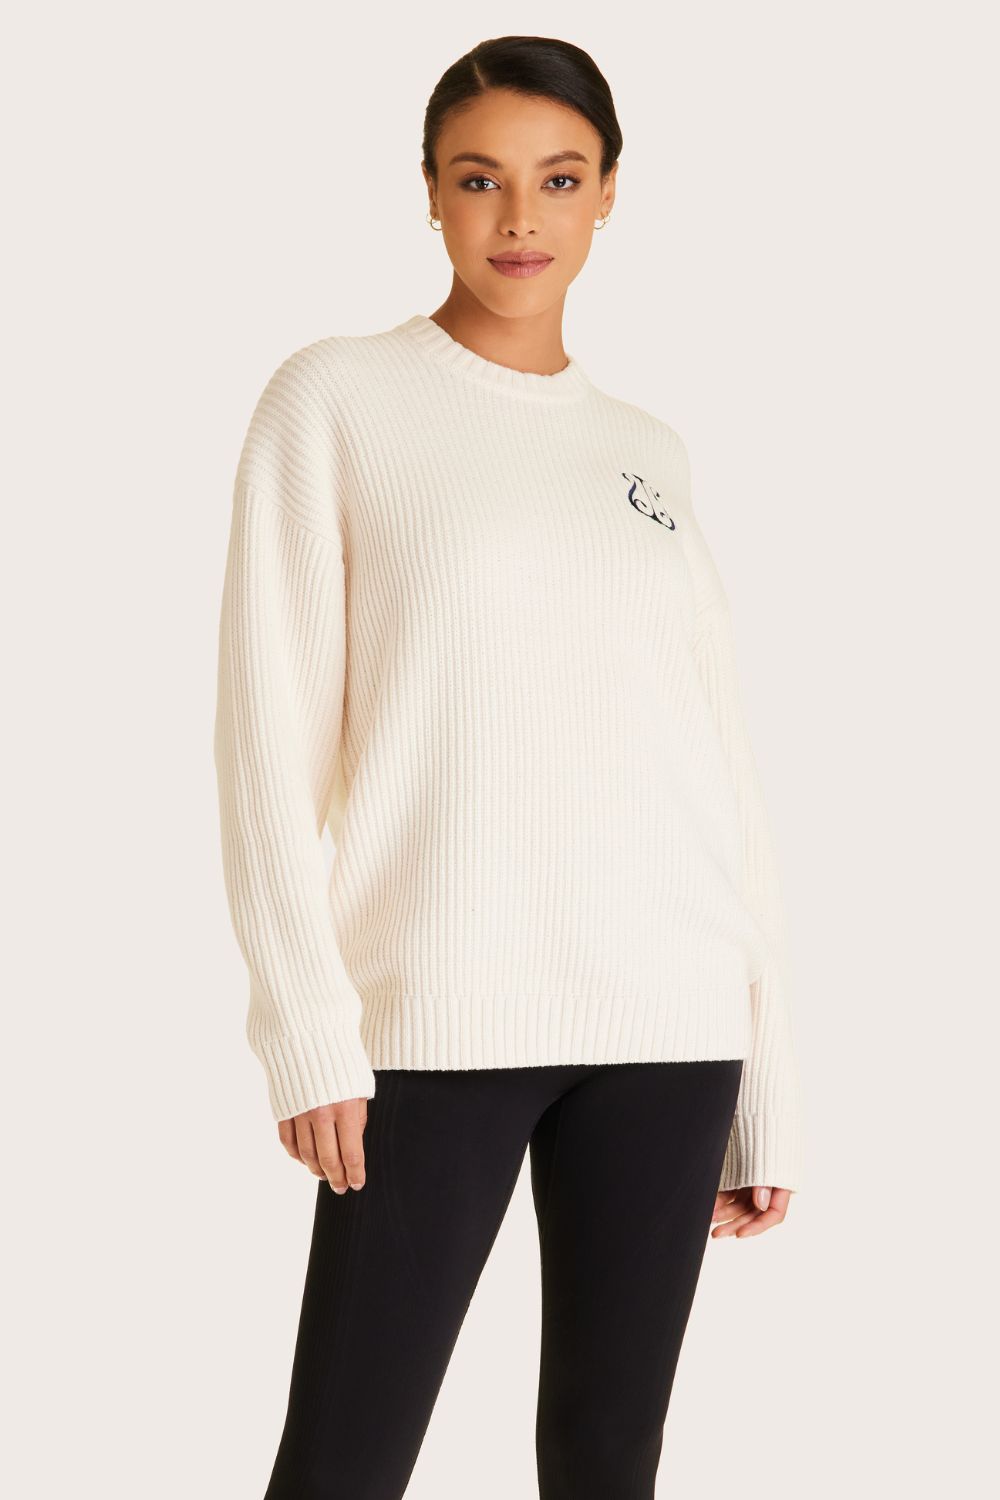 Alala women's white knit sweater with navy embroidered logo